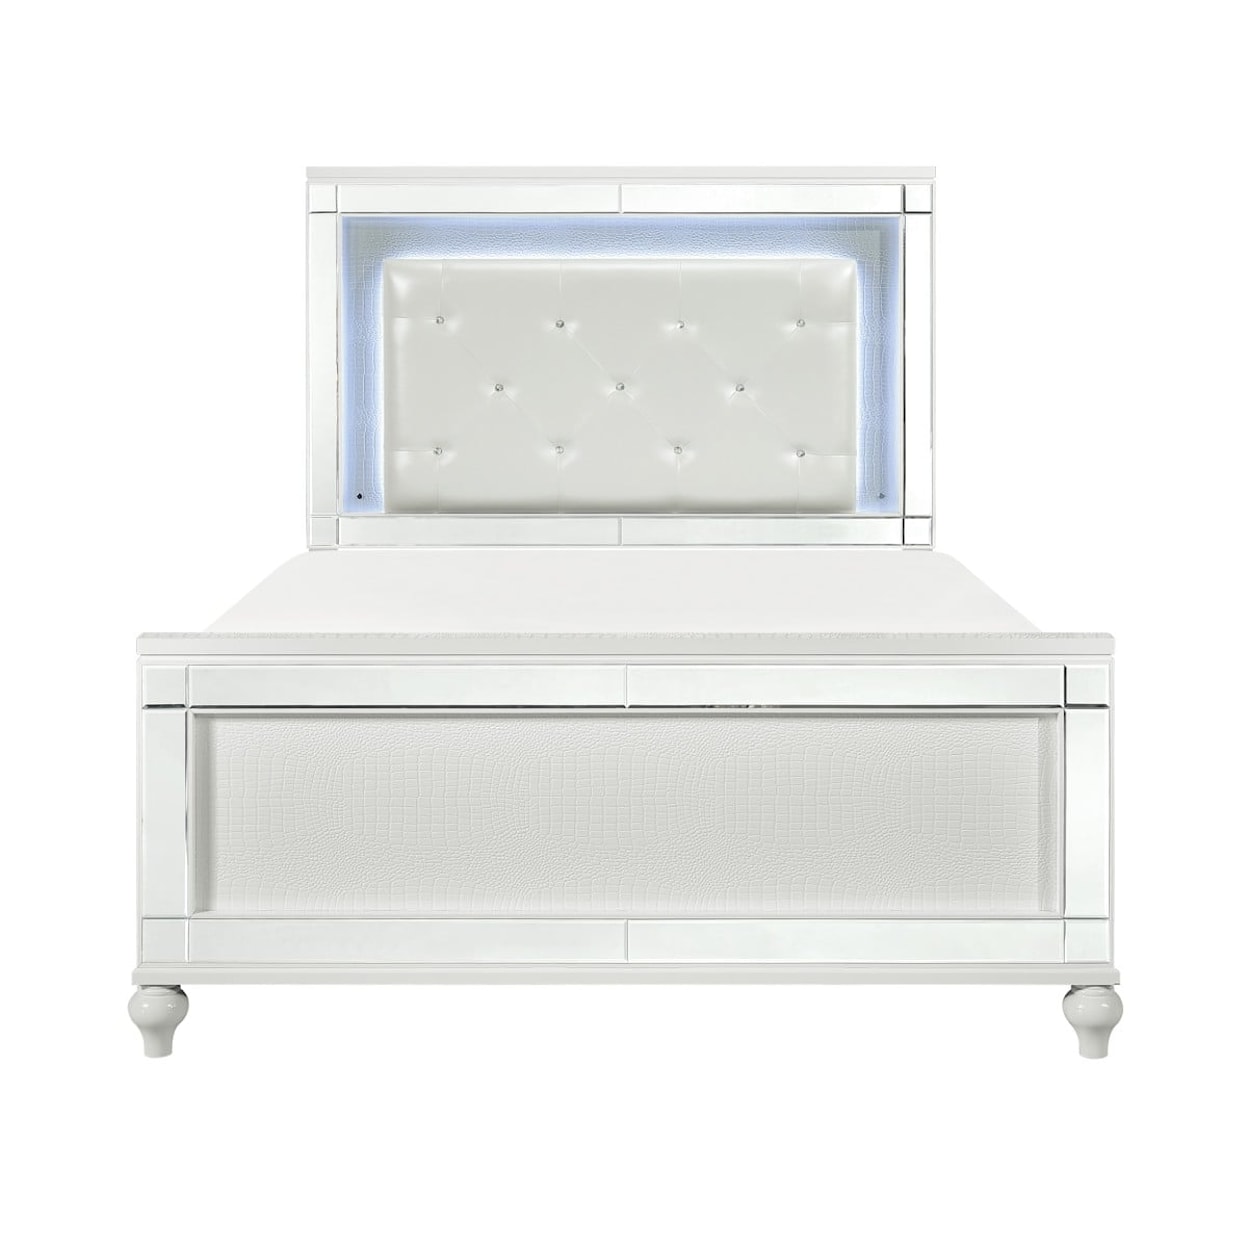 Homelegance Furniture Alonza Queen Bed with LED Lighting